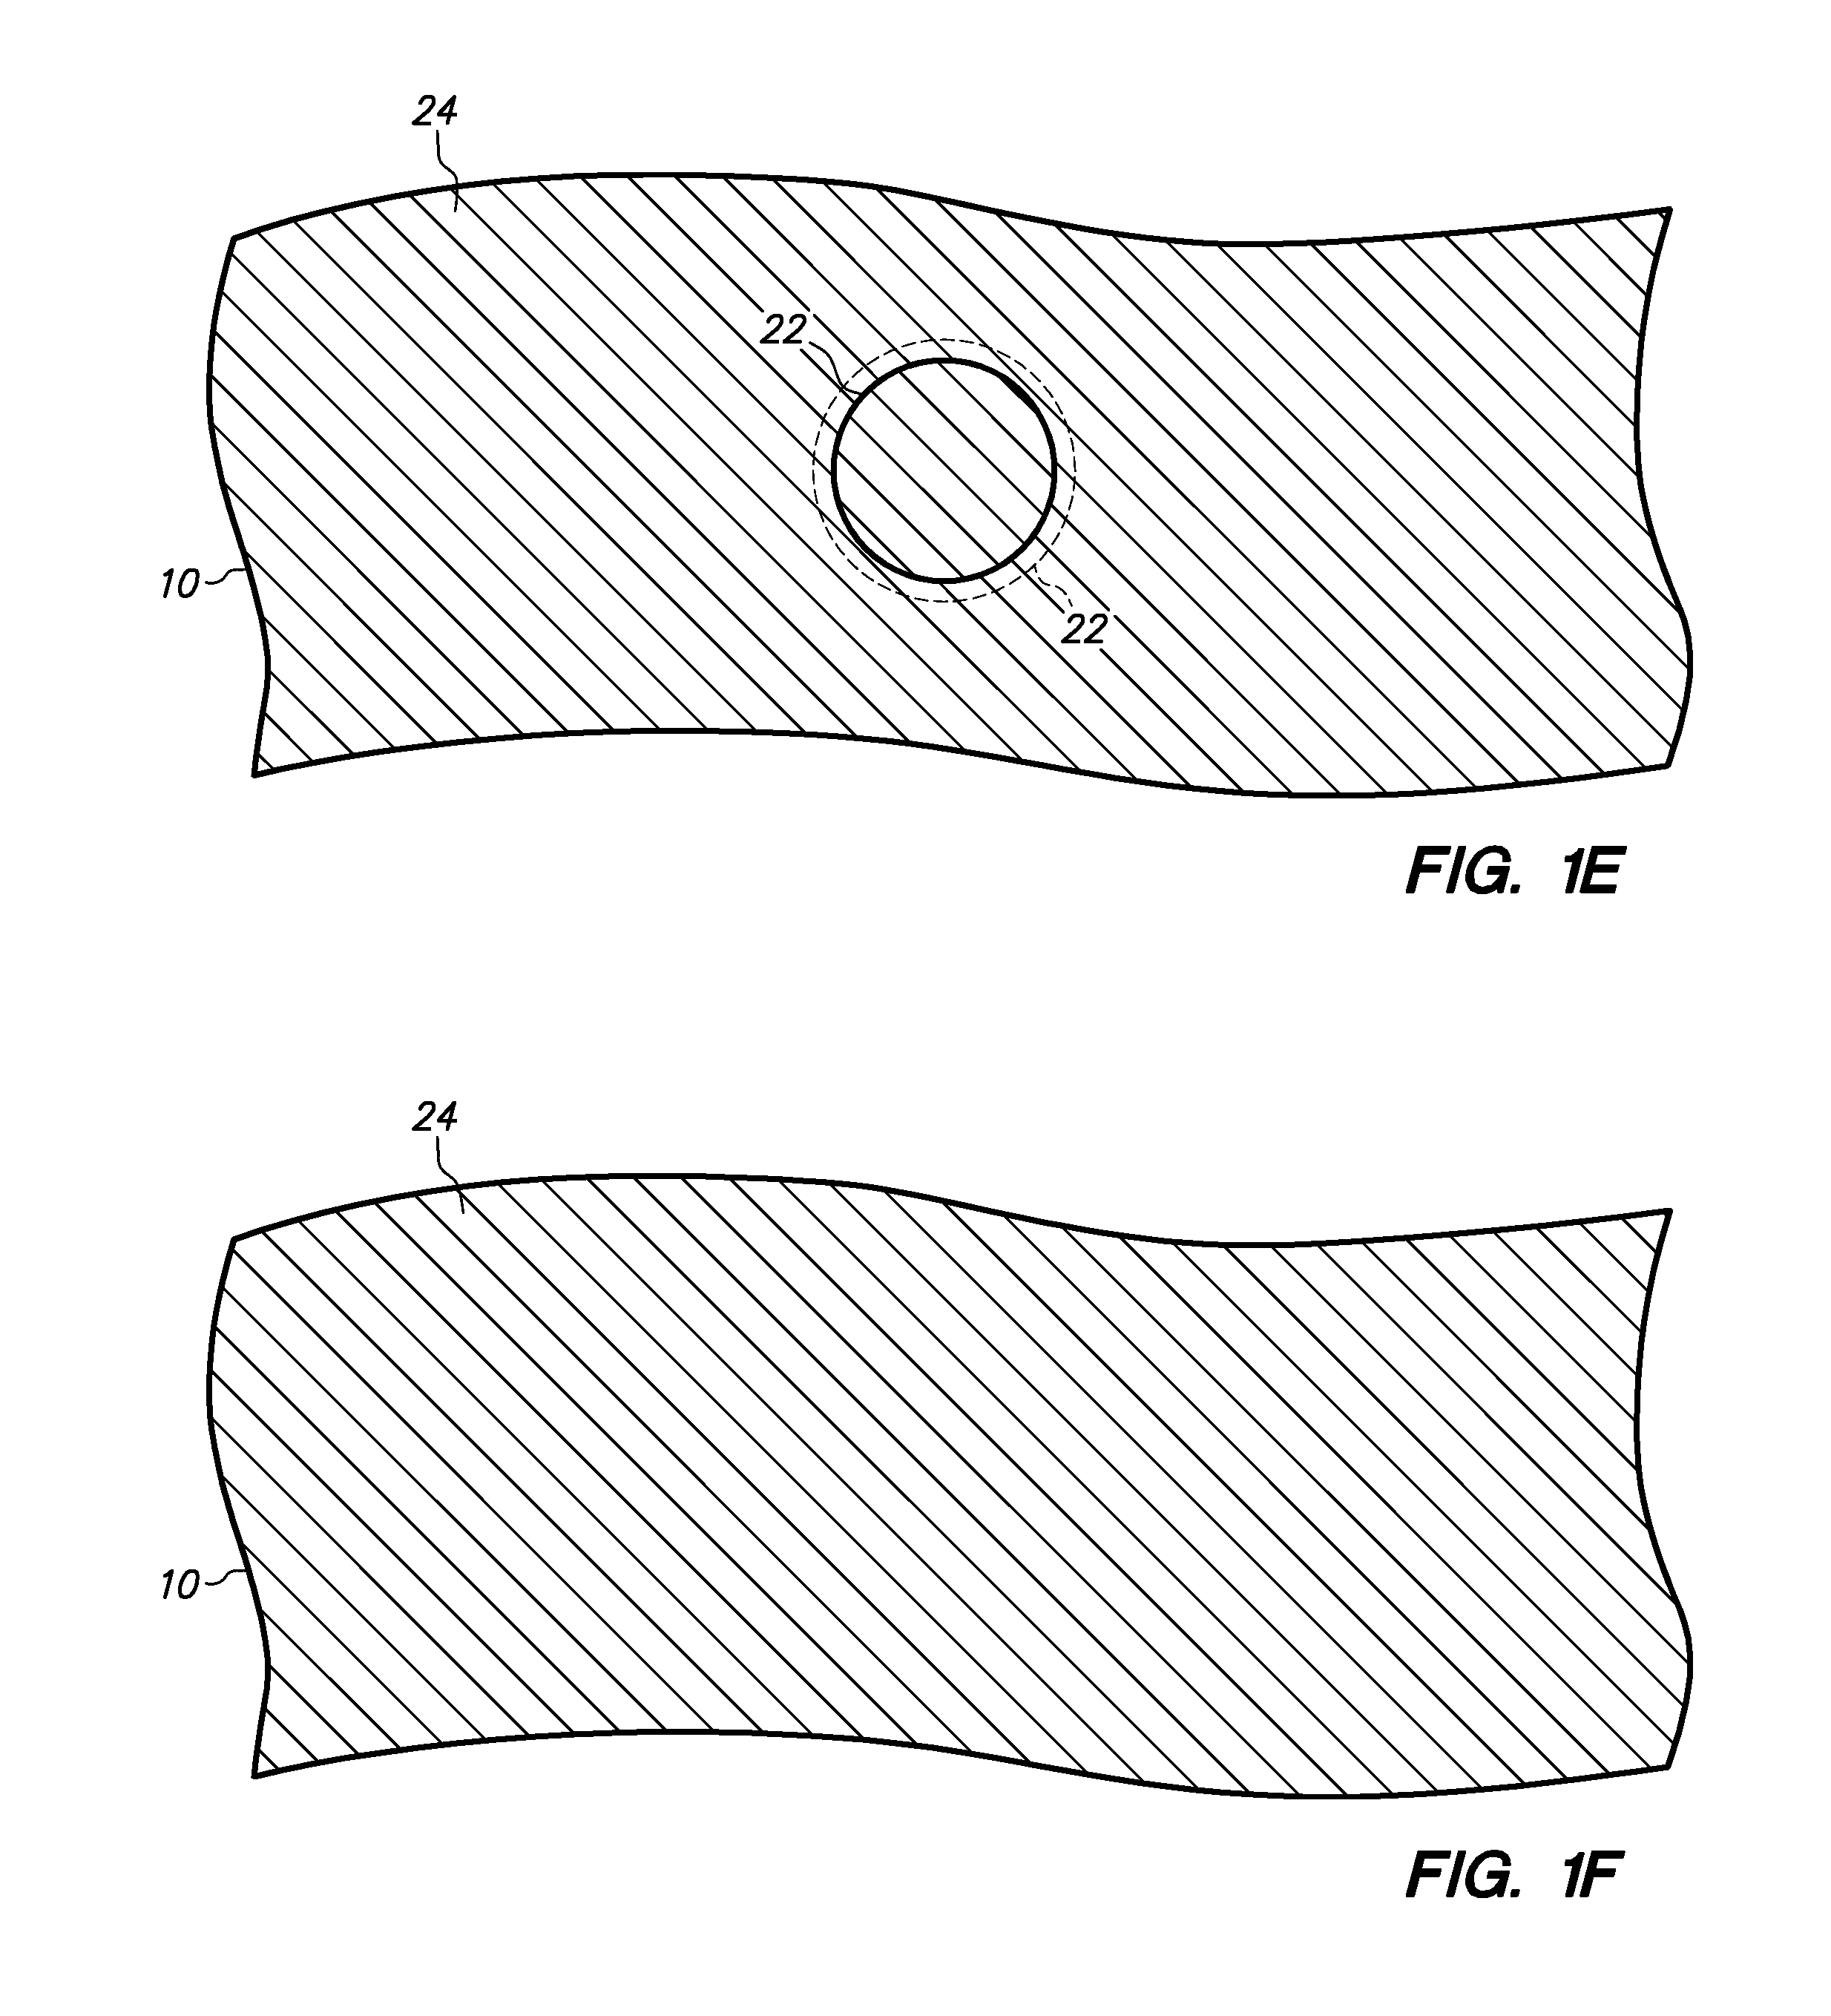 Method of making a semiconductor chip assembly with a post/base heat spreader and a multilevel conductive trace